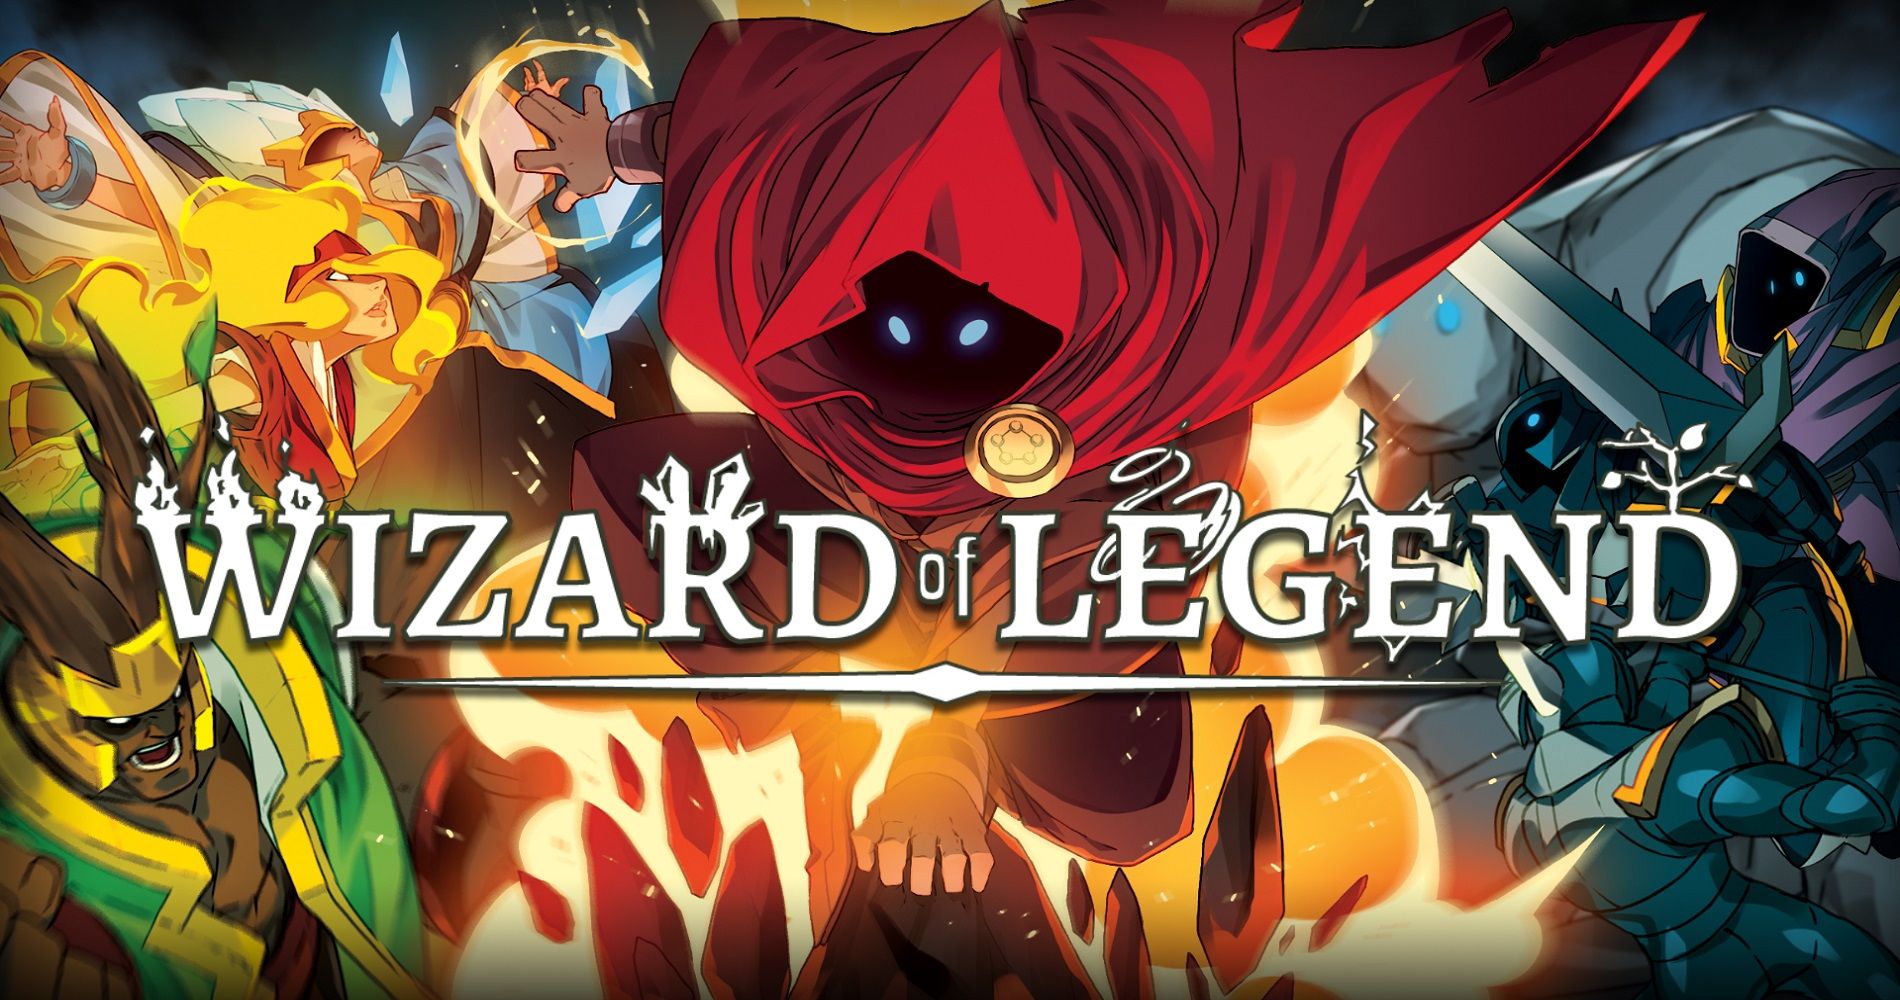 Wizard of Legend is out now on iOS and Android with optimised